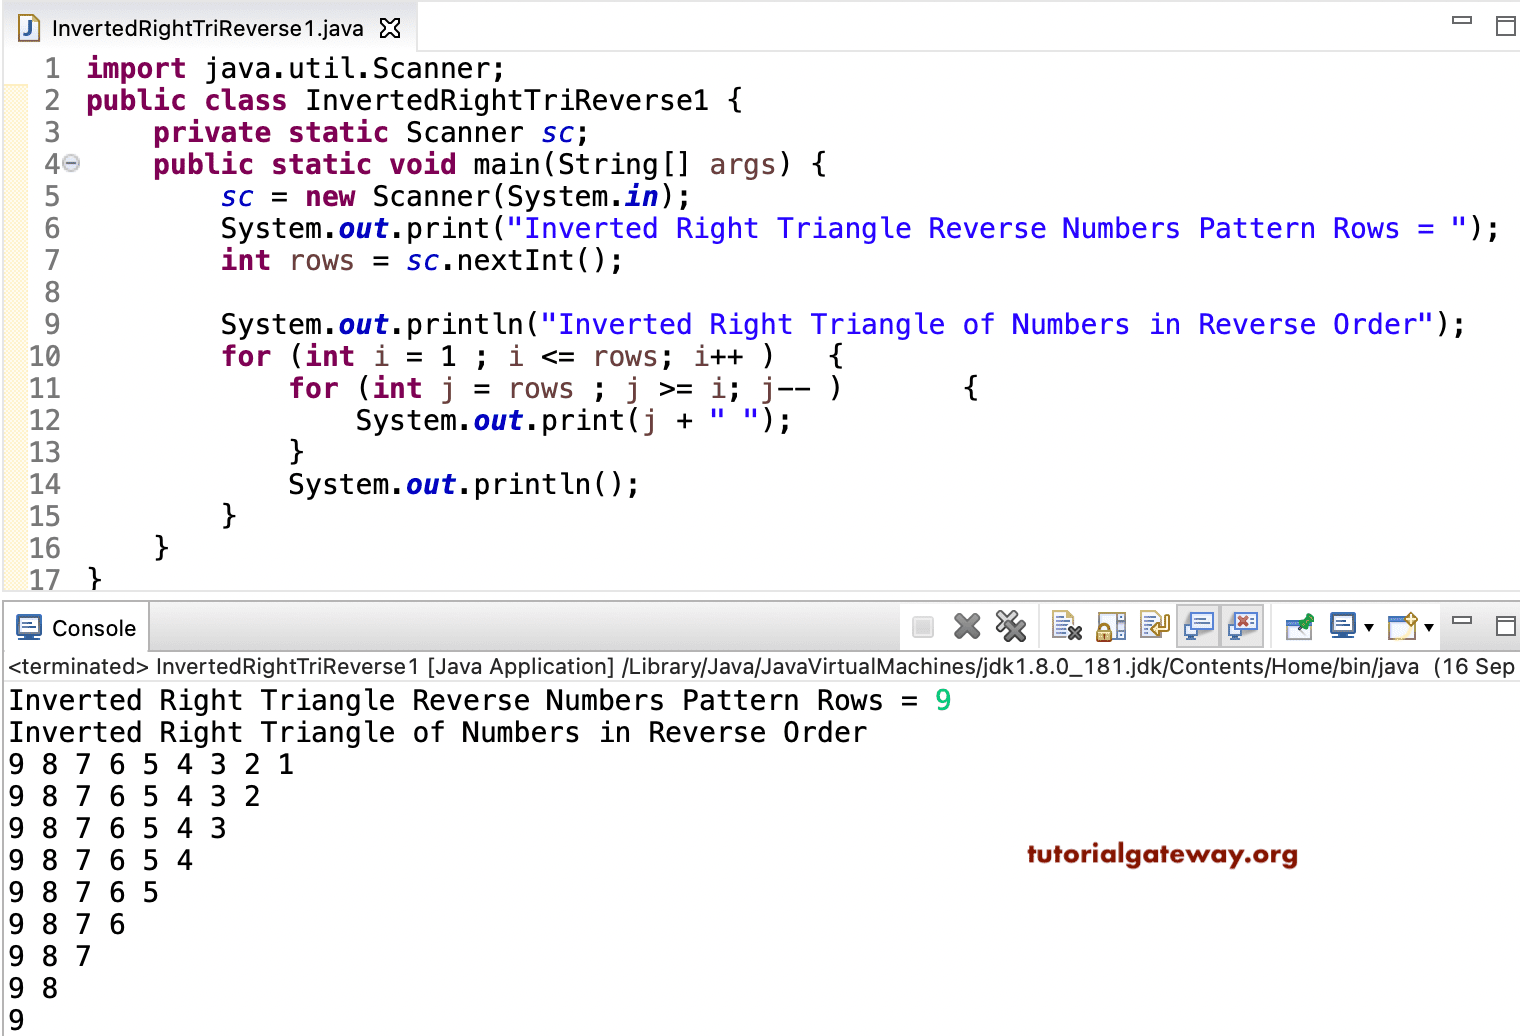 Java Program to Print Inverted Right Triangle of Numbers in Reverse 1